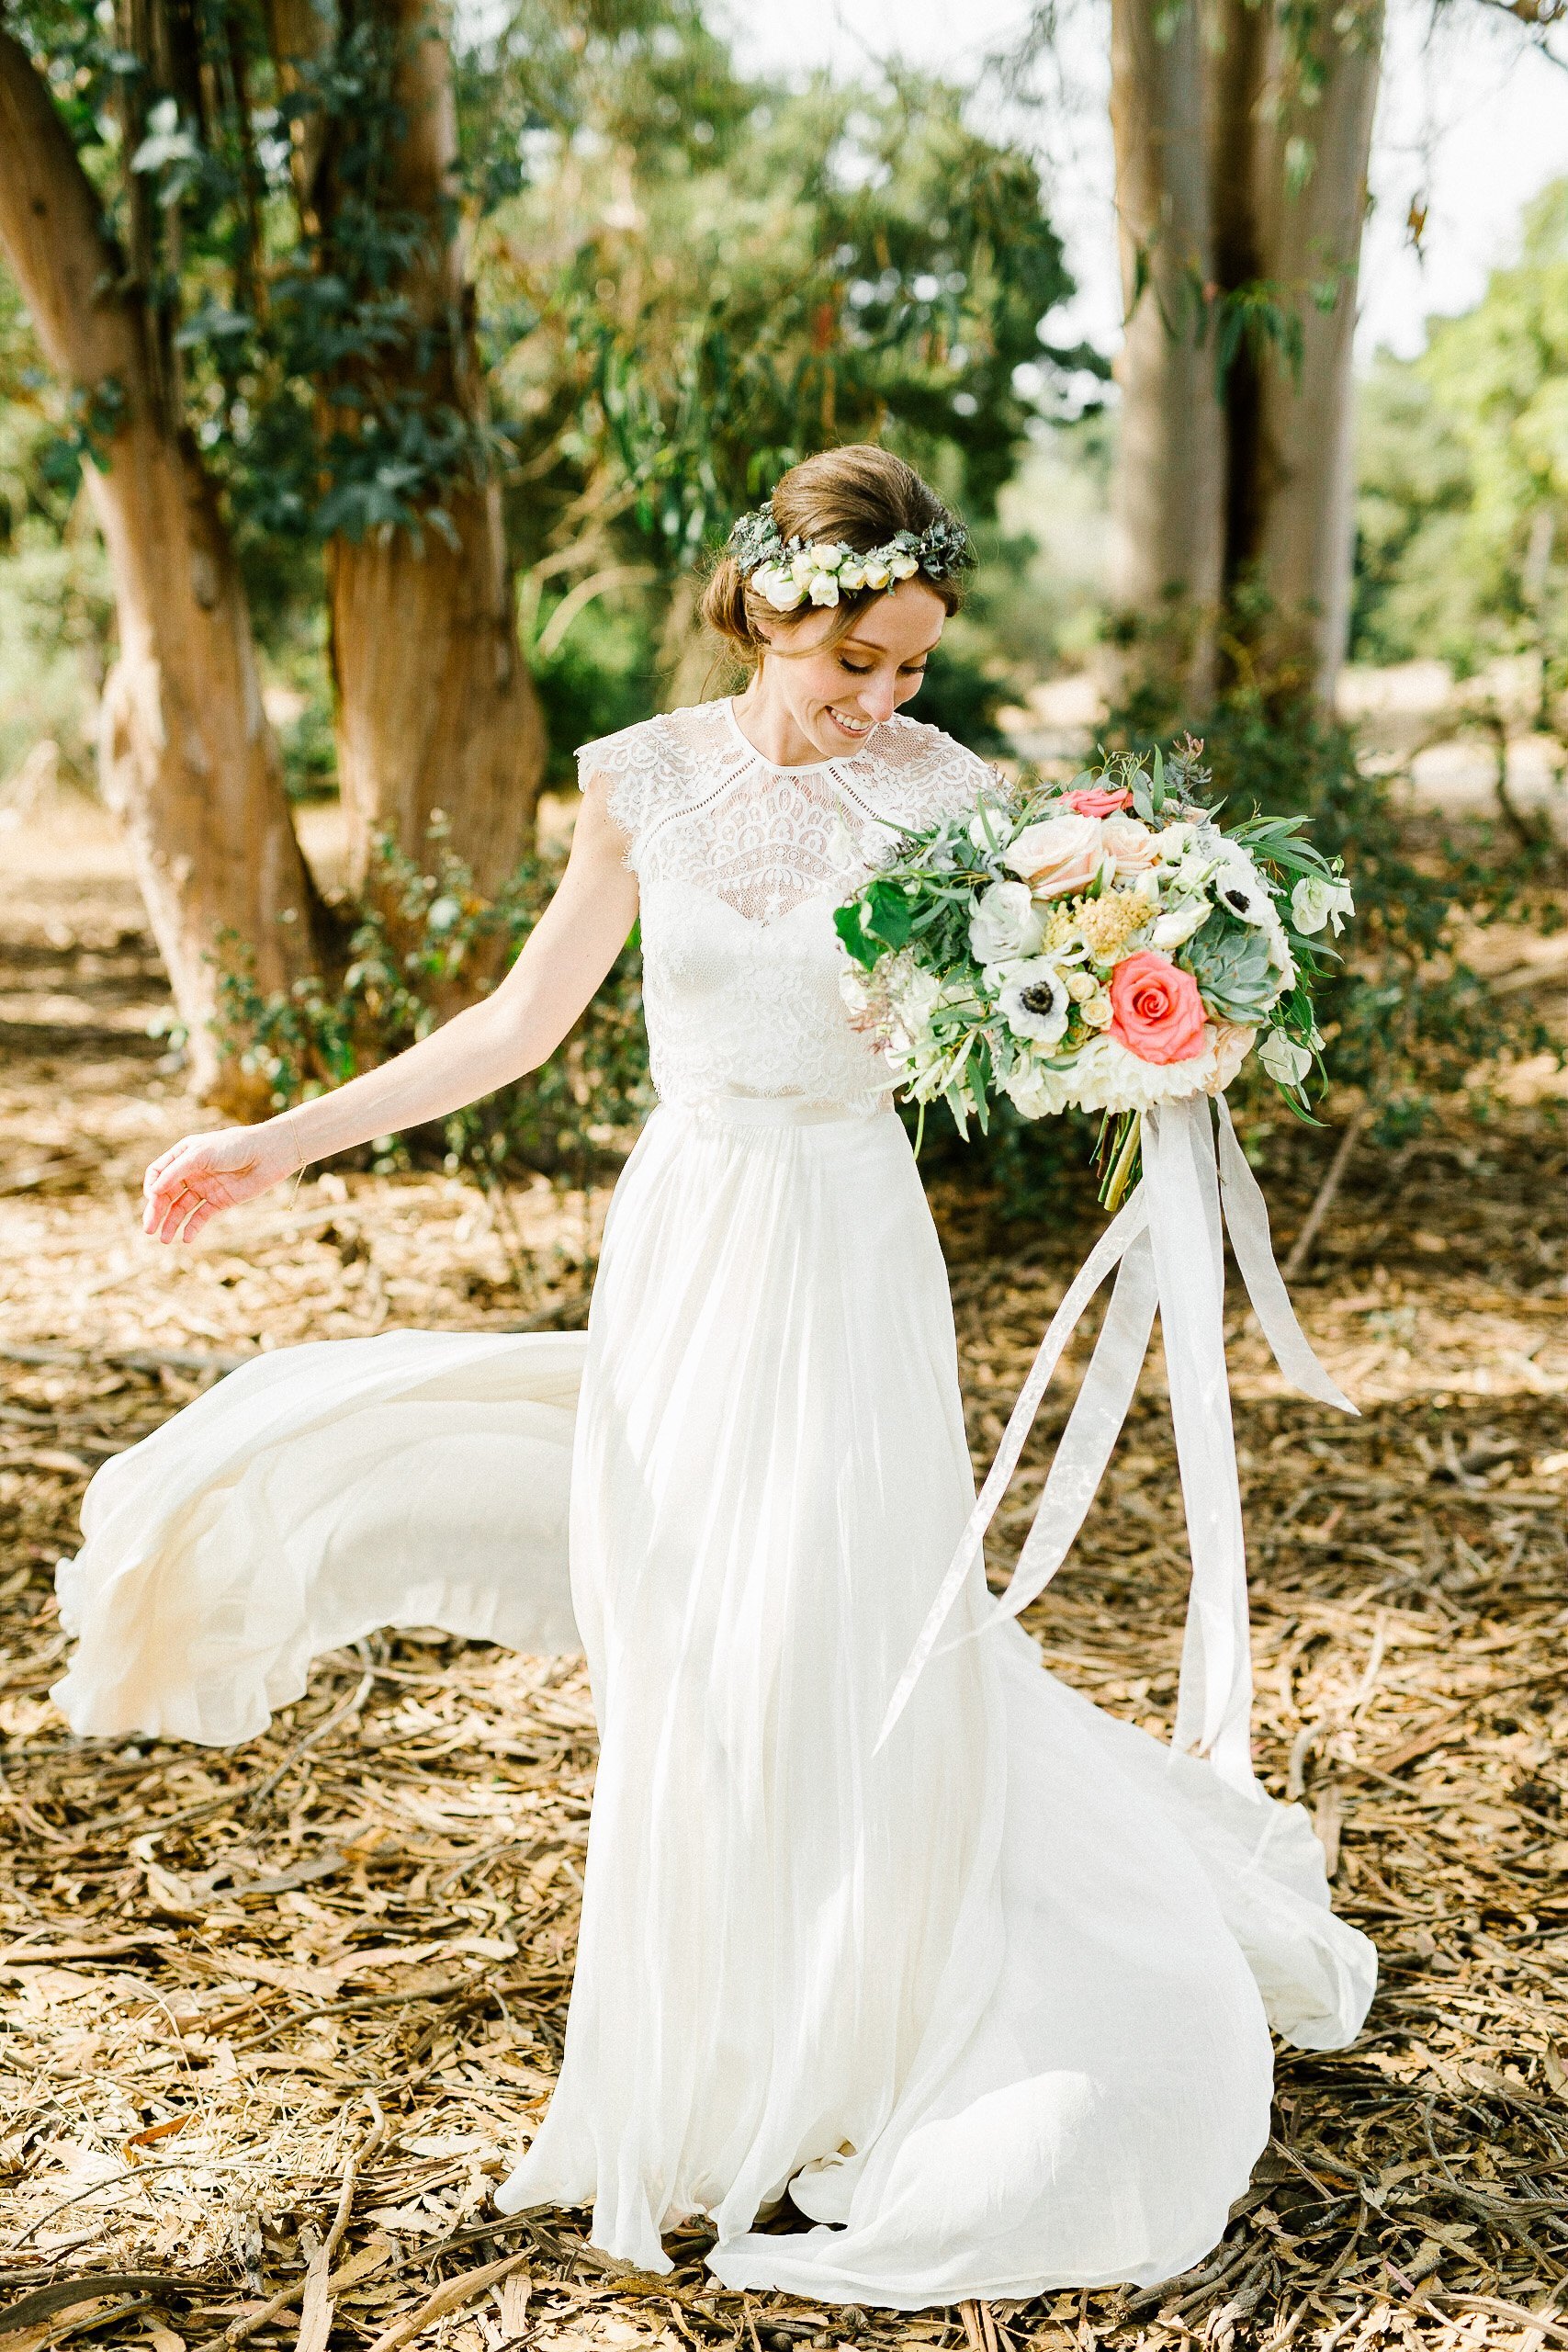 www.santabarbarawedding.com | Elings Park | Hannah Rose Grey Photography | Bride Twirling in the Park with Her Bouquet and Flower Crown